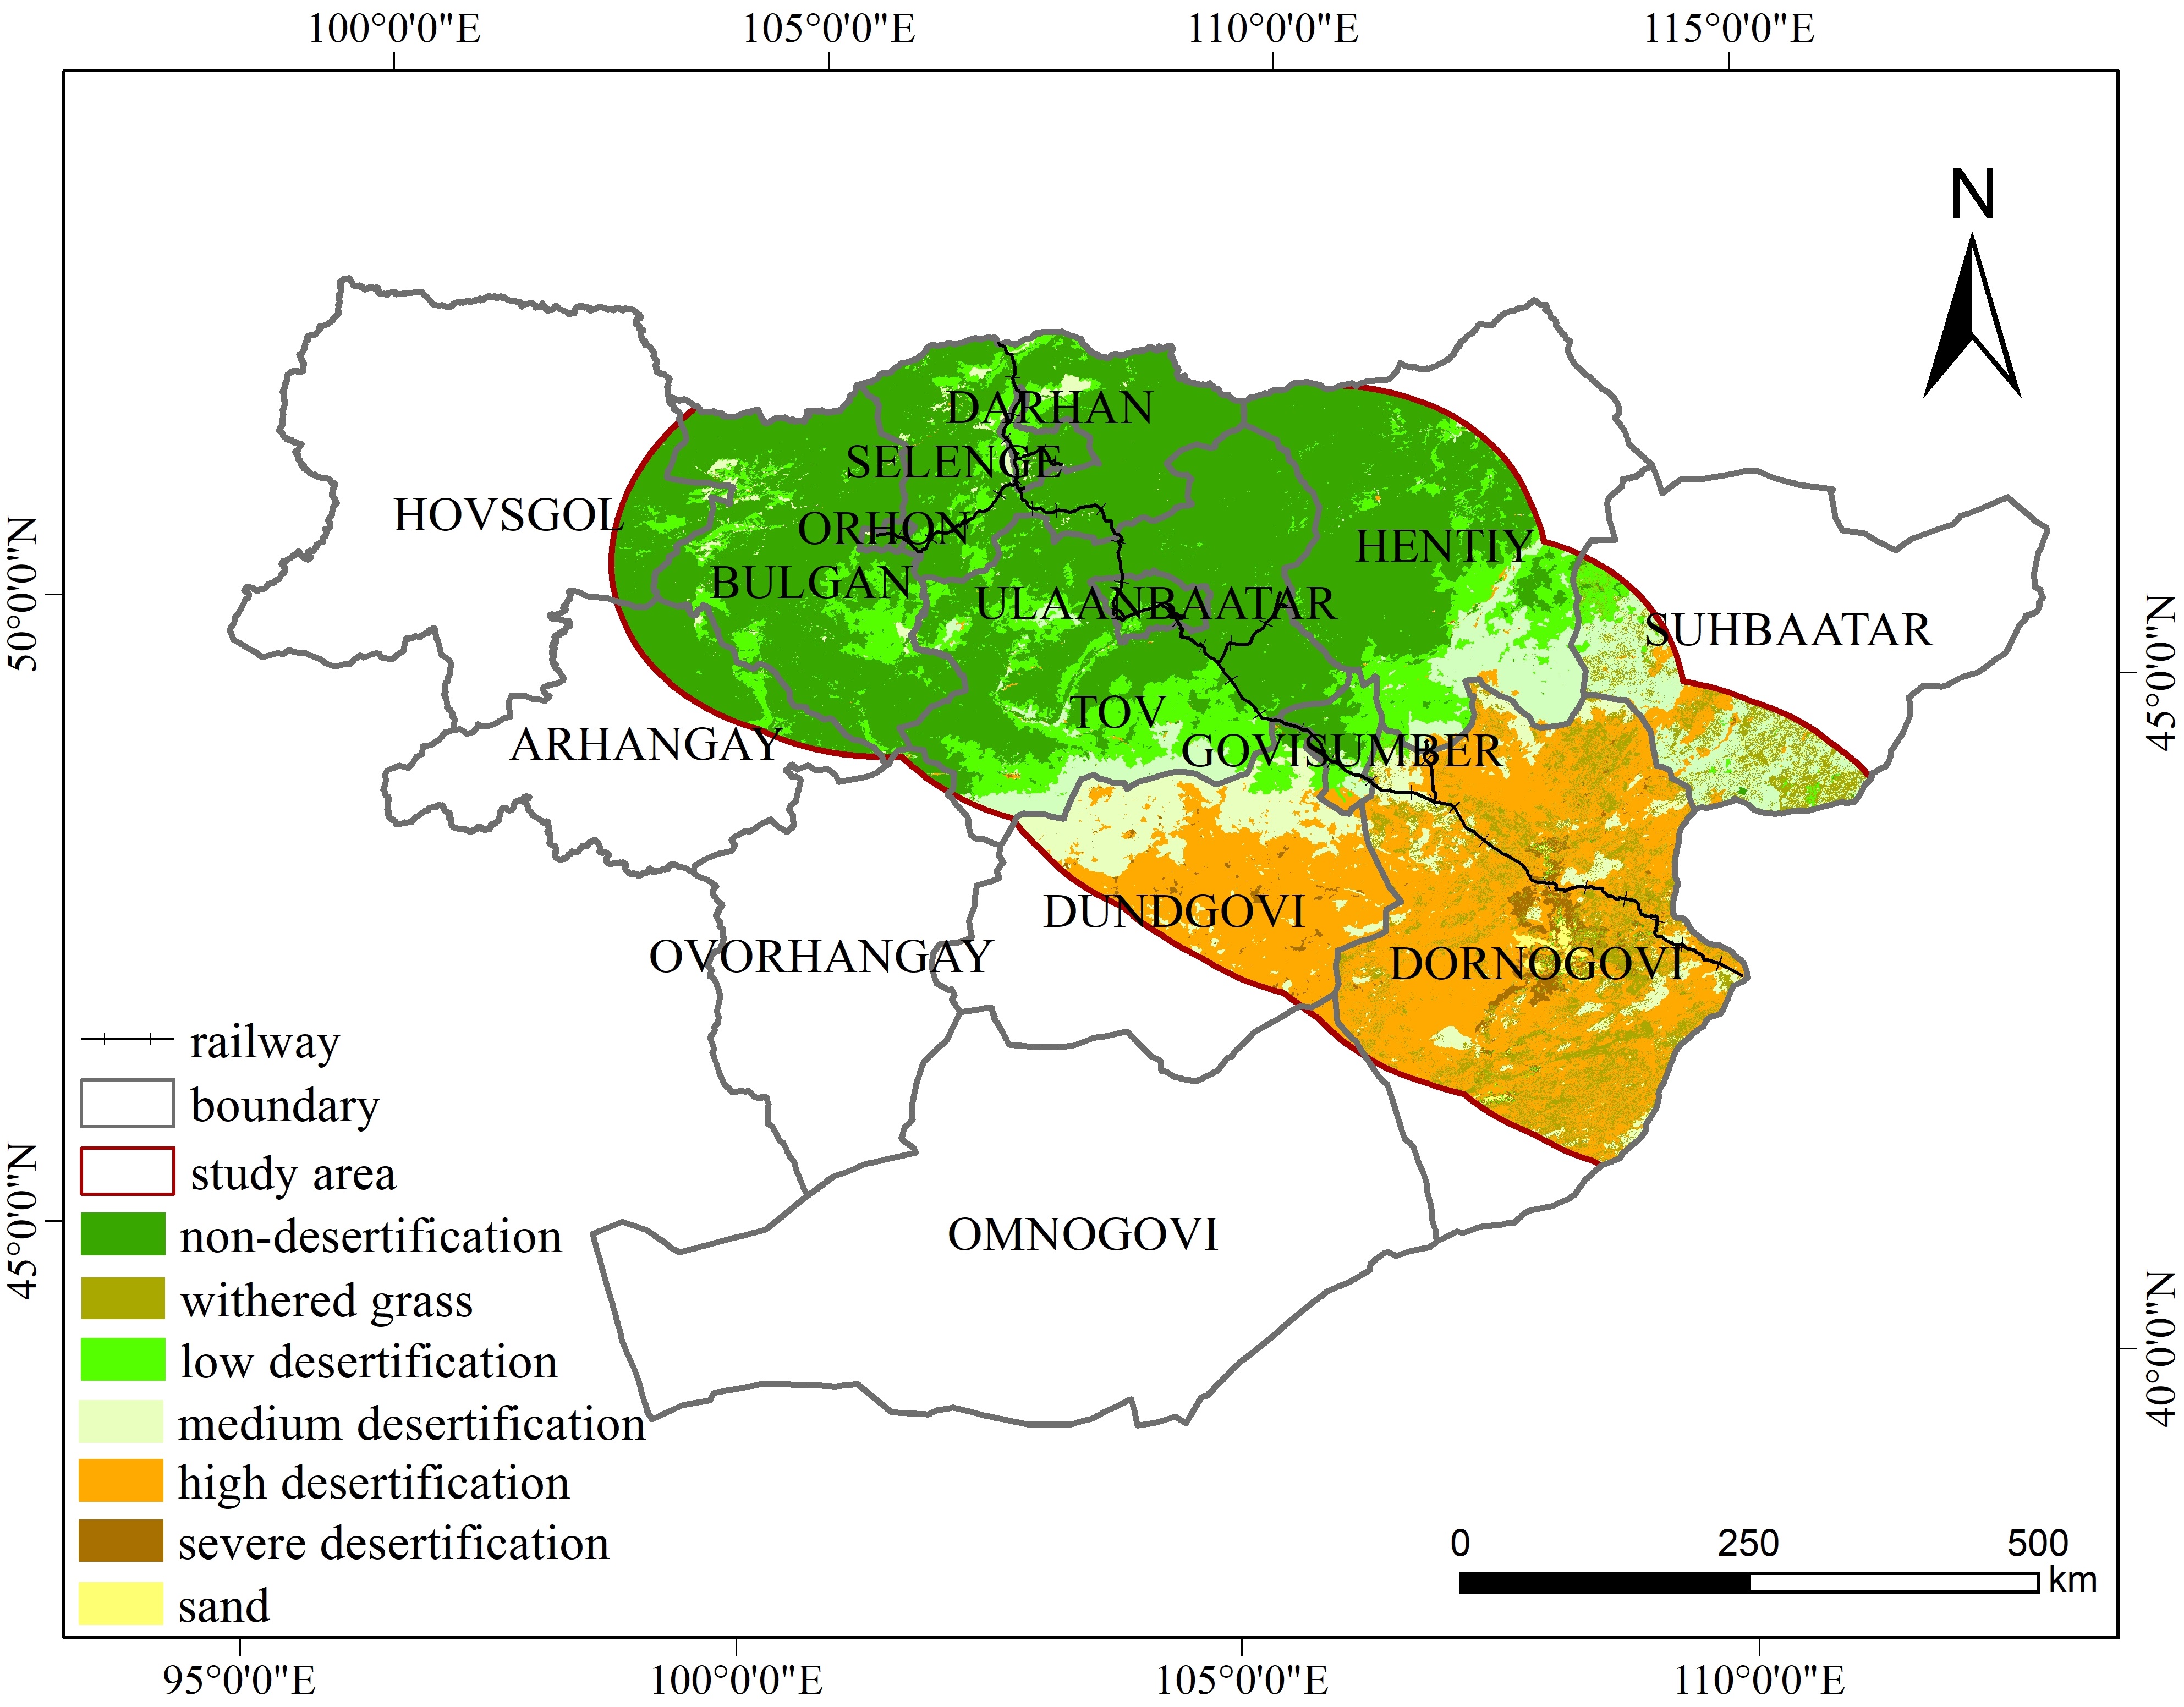 Spatio-temporal Distribution of Desertification Disaster along the China-Mongolia railway (Mongolia section) in 2000 and 2015